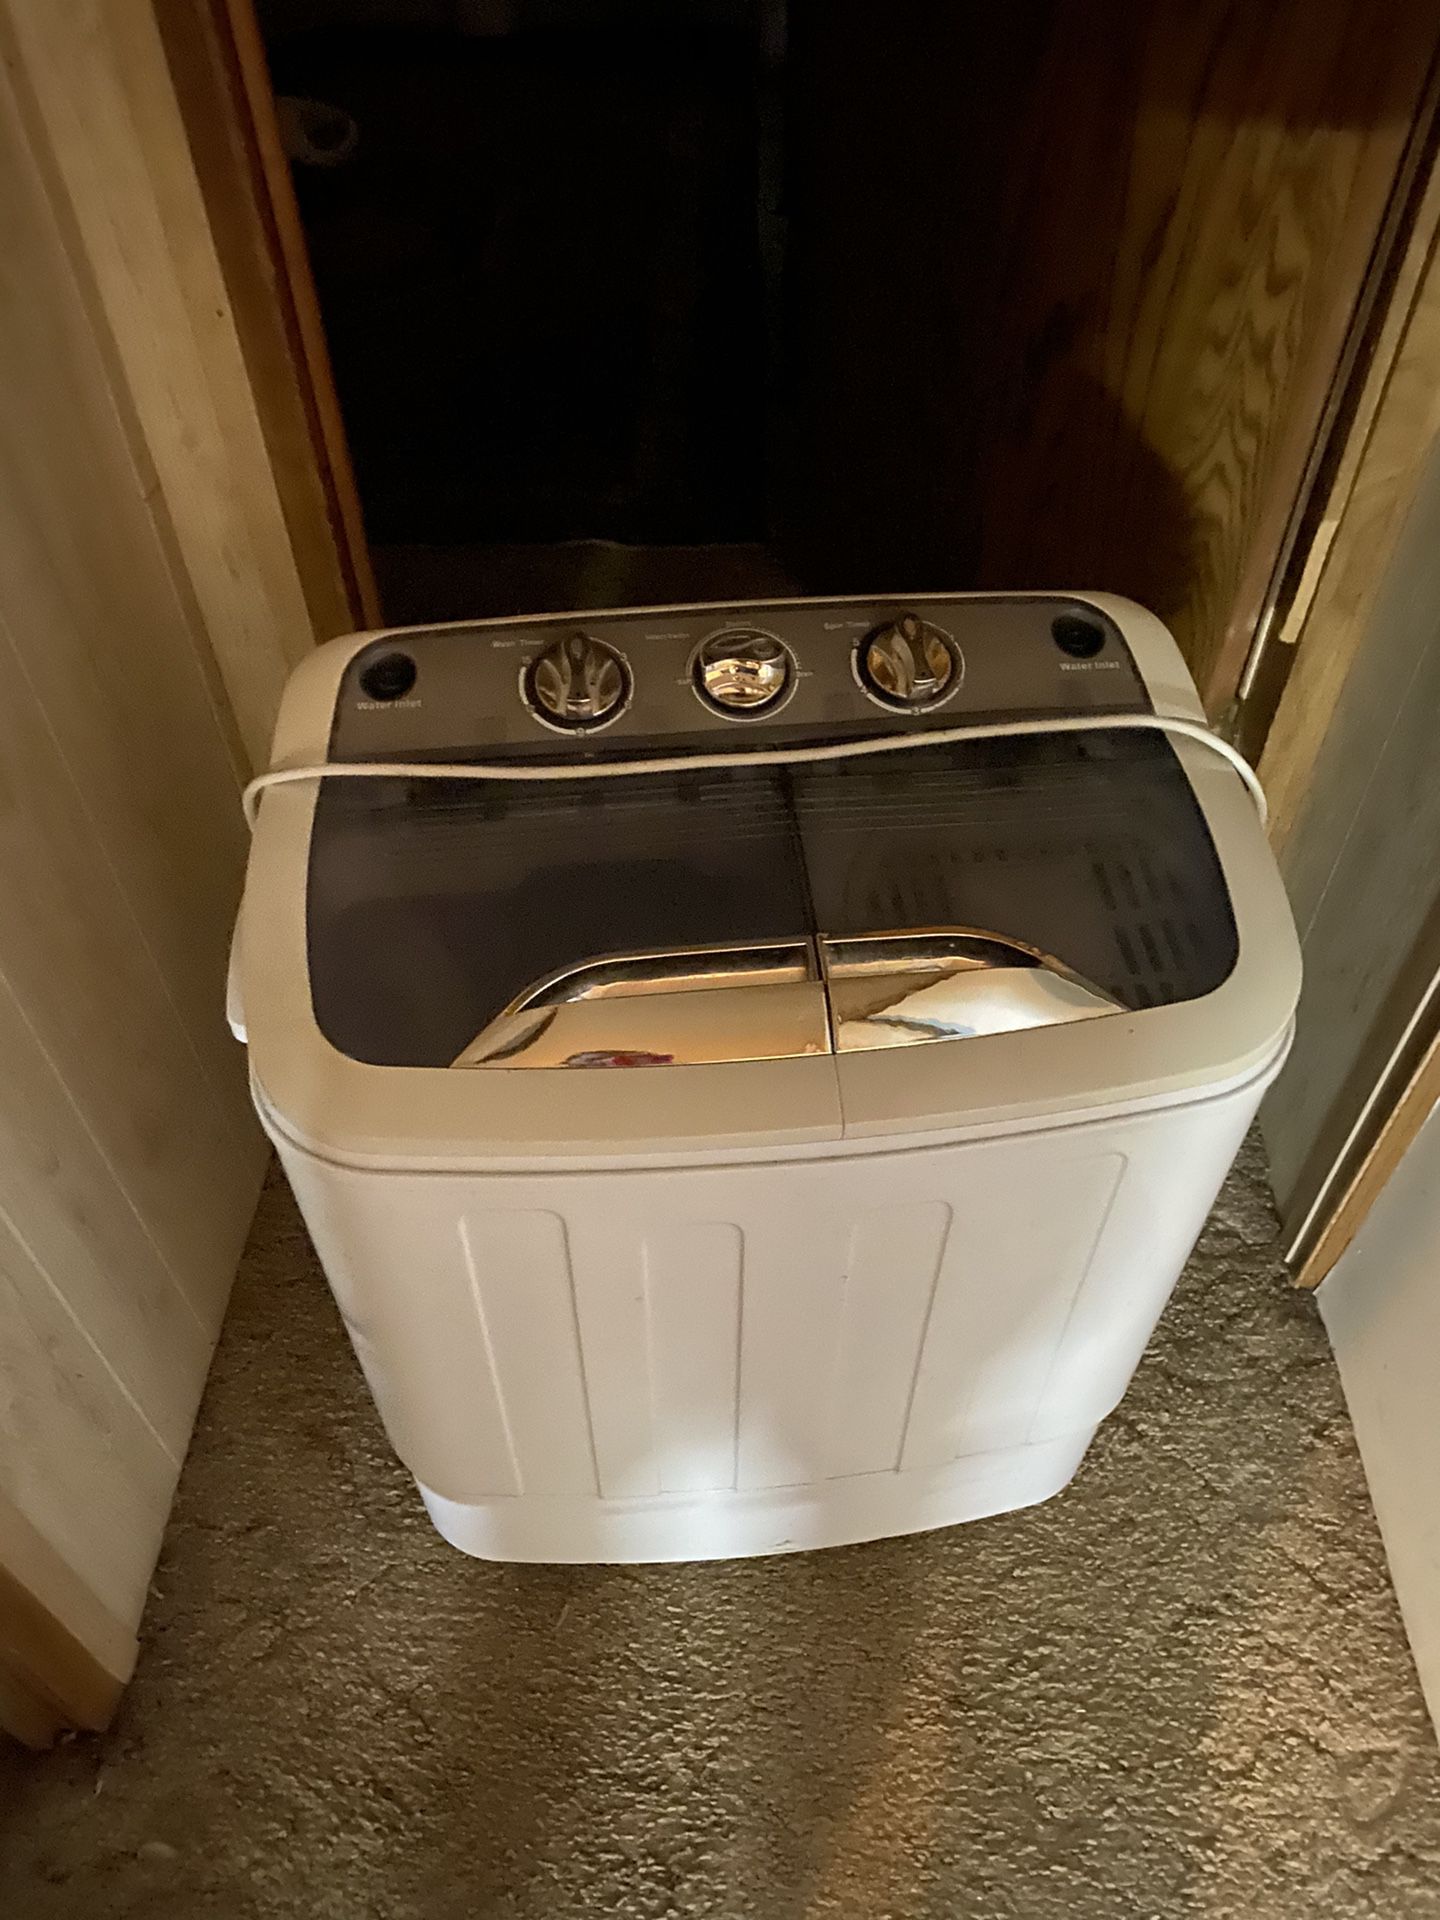 Portable washer / dryer